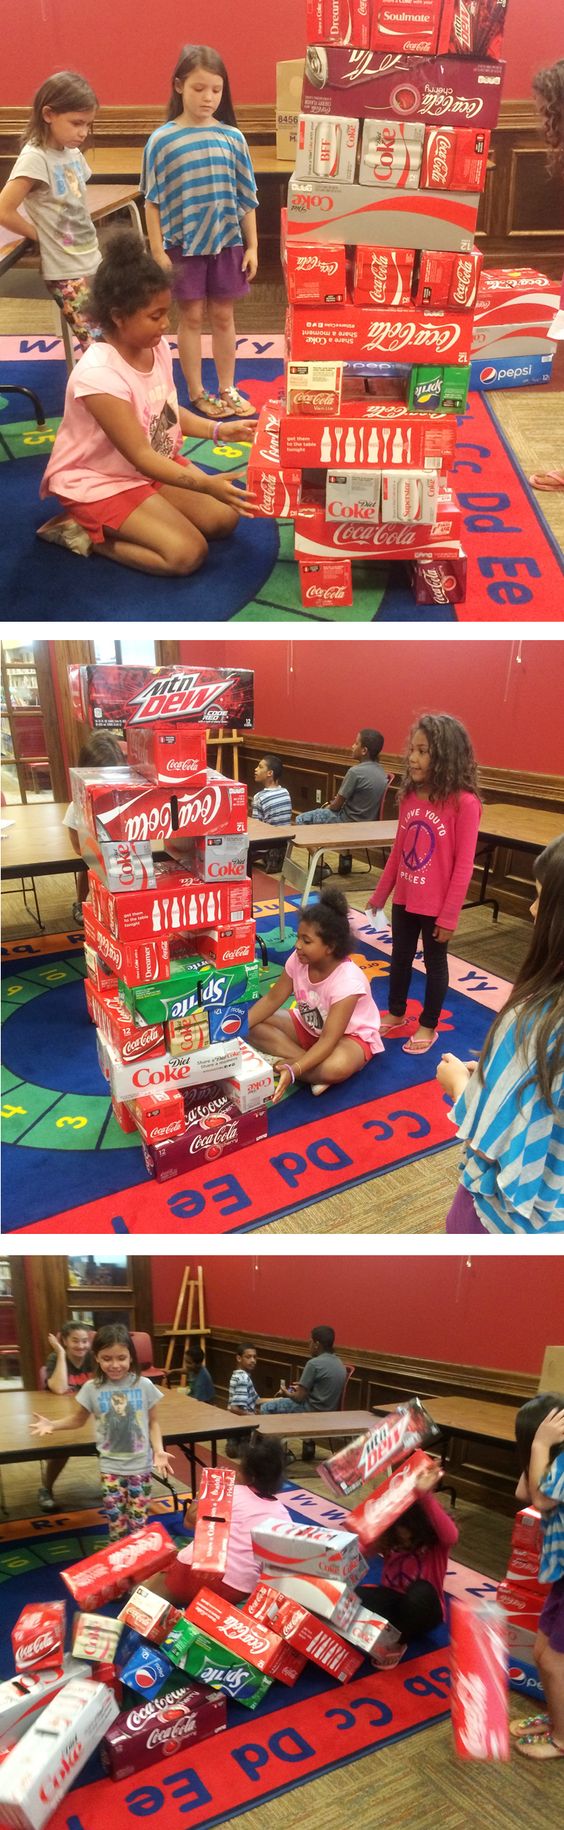 Giant Jenga Game Activity Made With Recycled Old Soda Cartons - Recycle & Play for Little Ones 